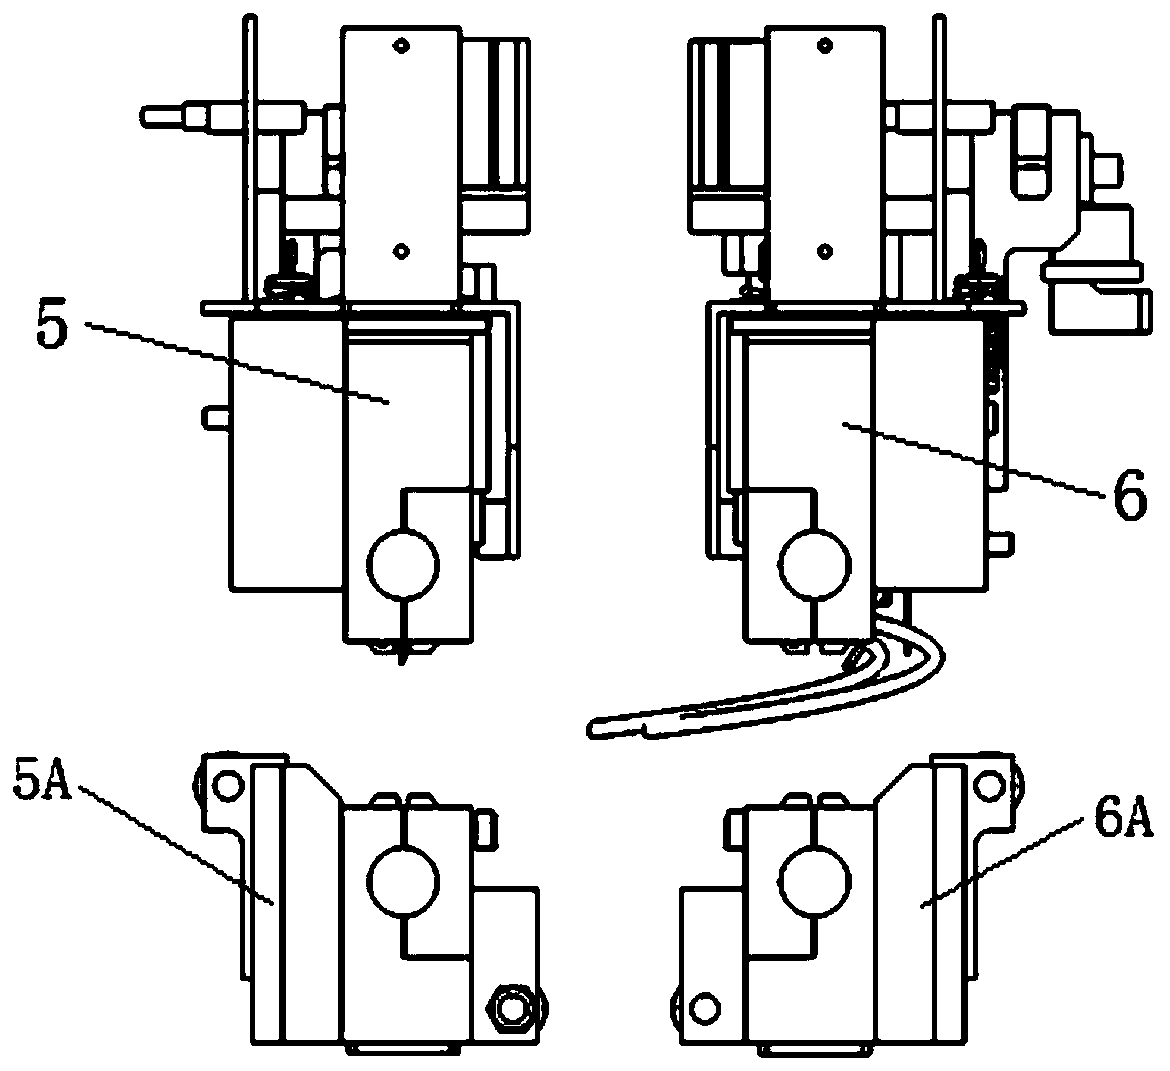 Double-transverse-sealing structure of reciprocating type packing machine